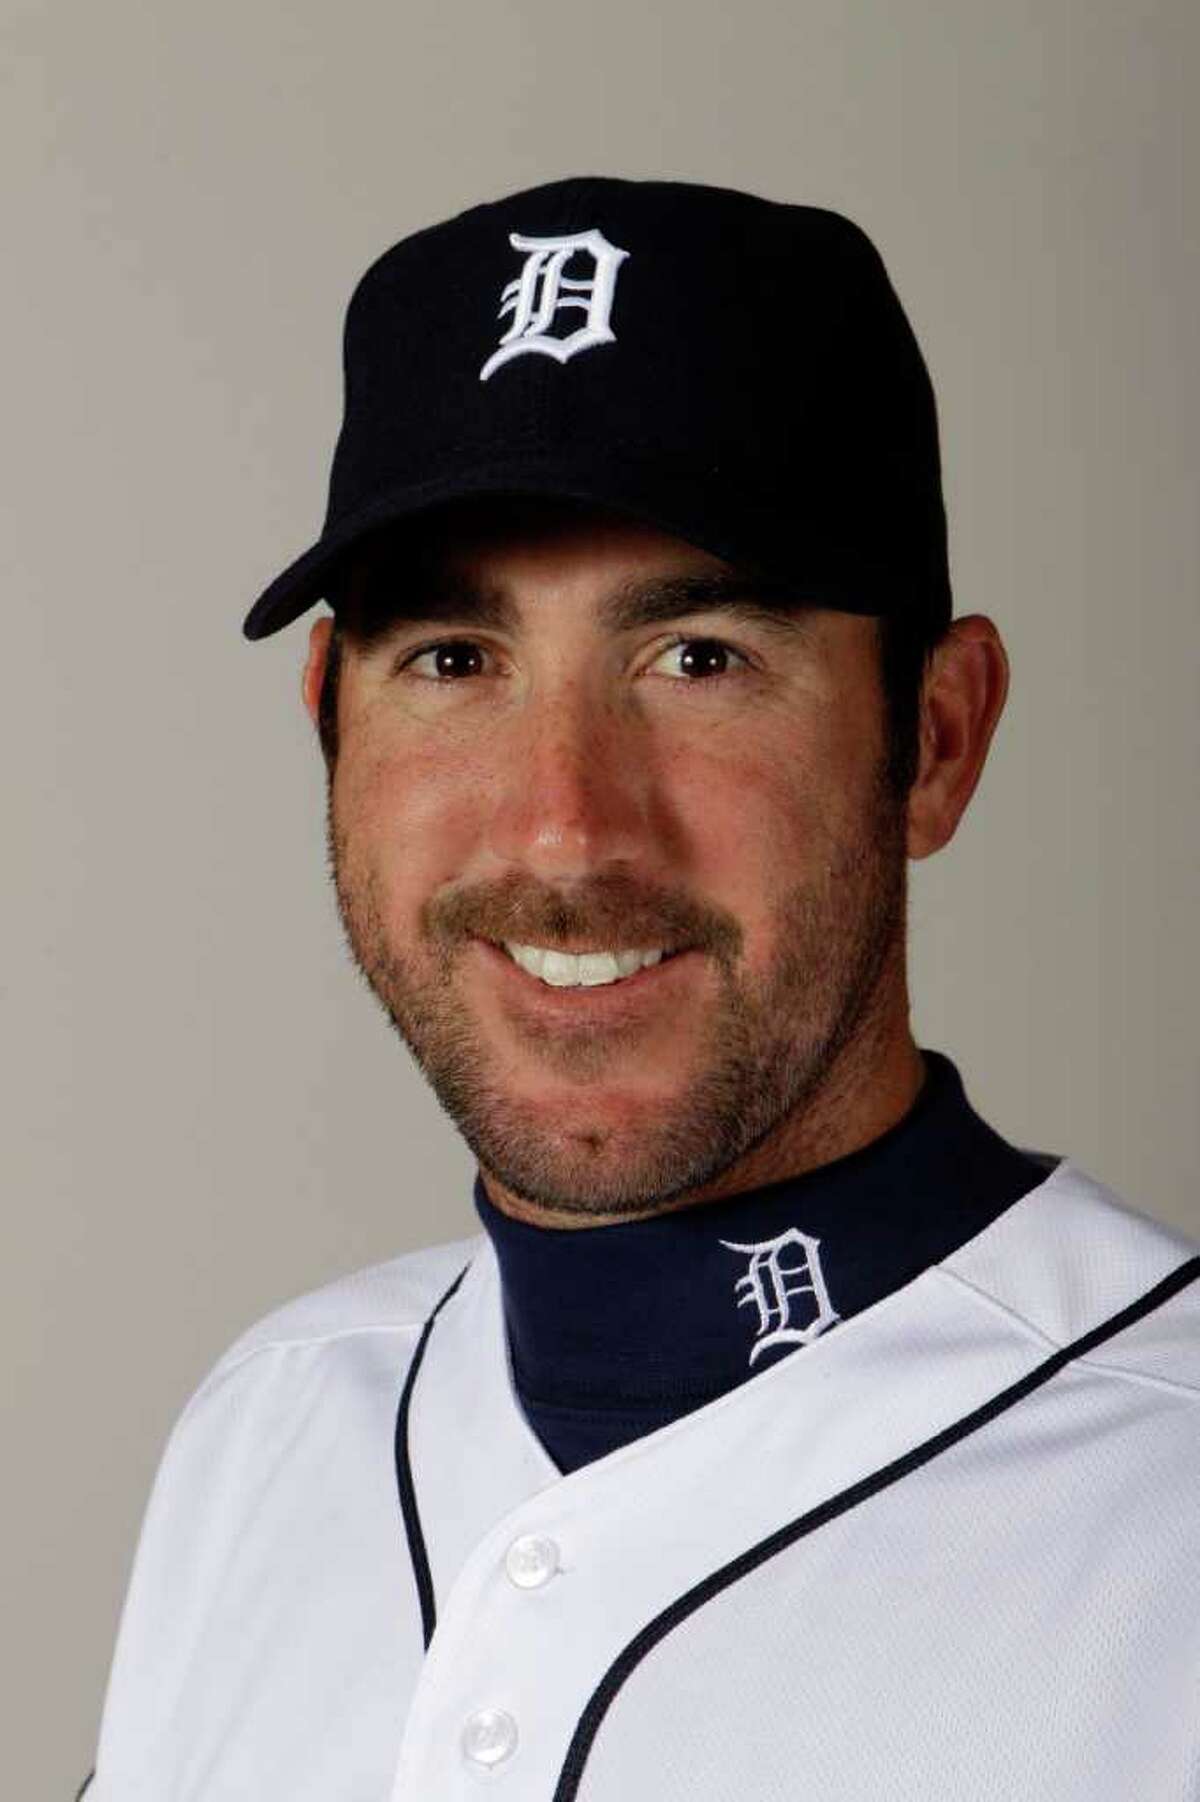 Justin Verlander unanimously wins 3rd Cy Young Award after